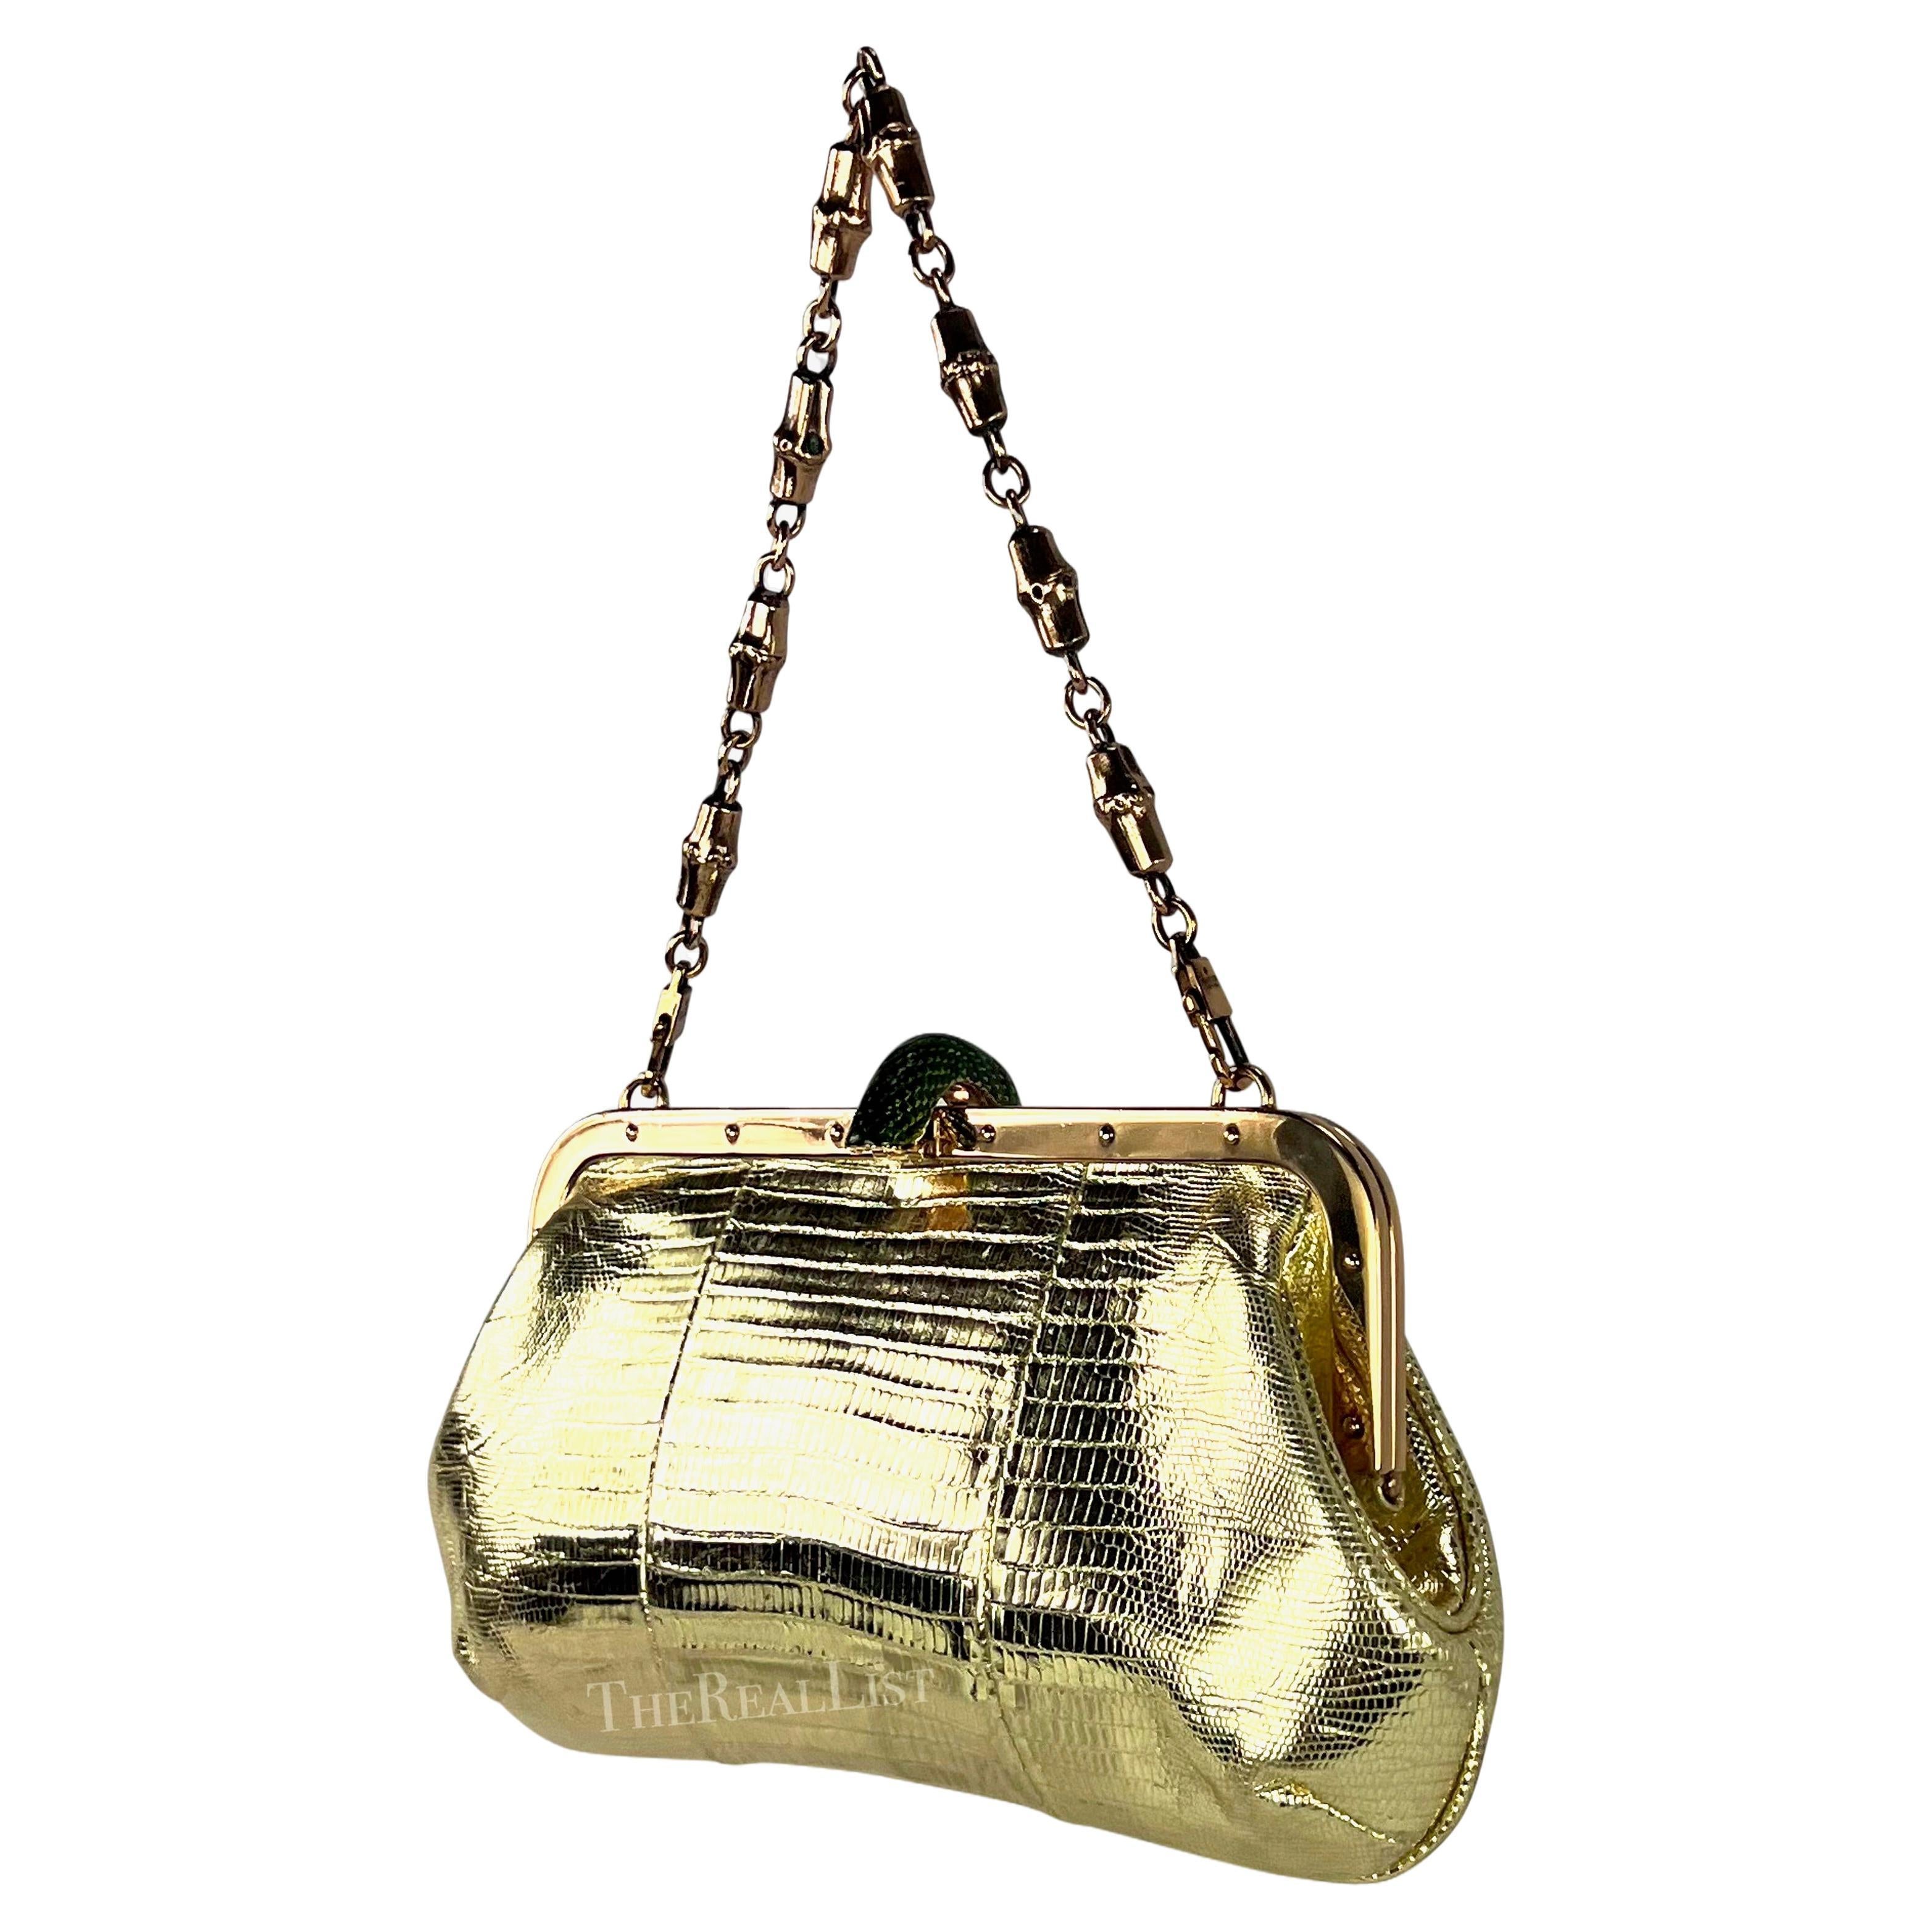 S/S 2004 Gucci by Tom Ford Runway Gold Lizard Skin Snake Convertible Bag  7